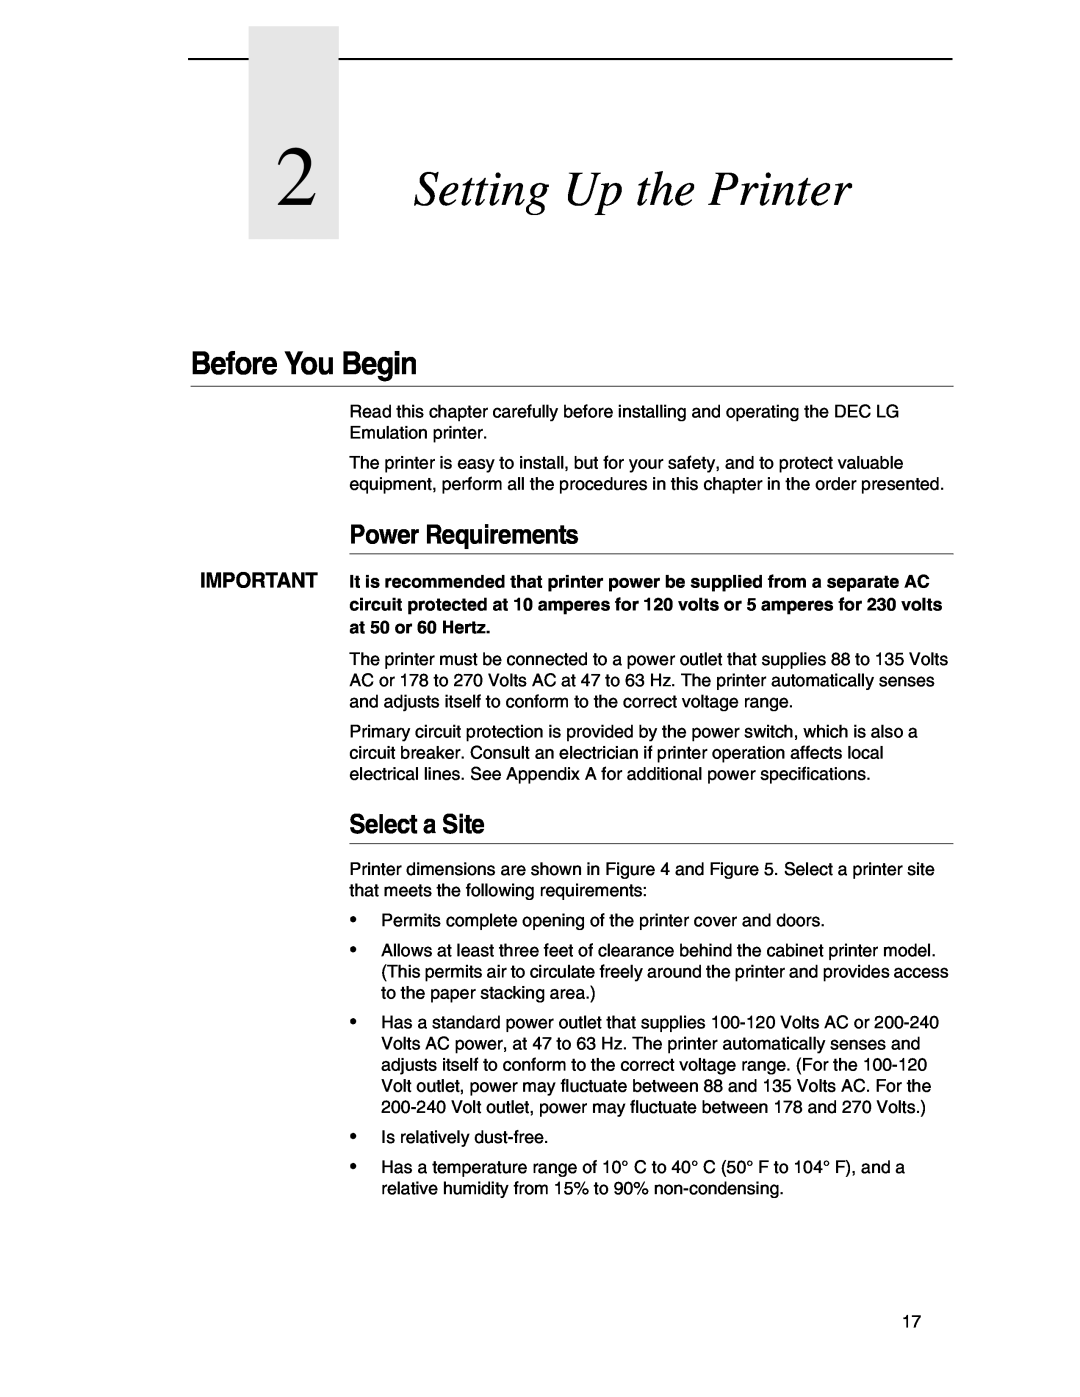 Compaq P5000 Series setup guide Setting Up the Printer, Before You Begin, Power Requirements, Select a Site 